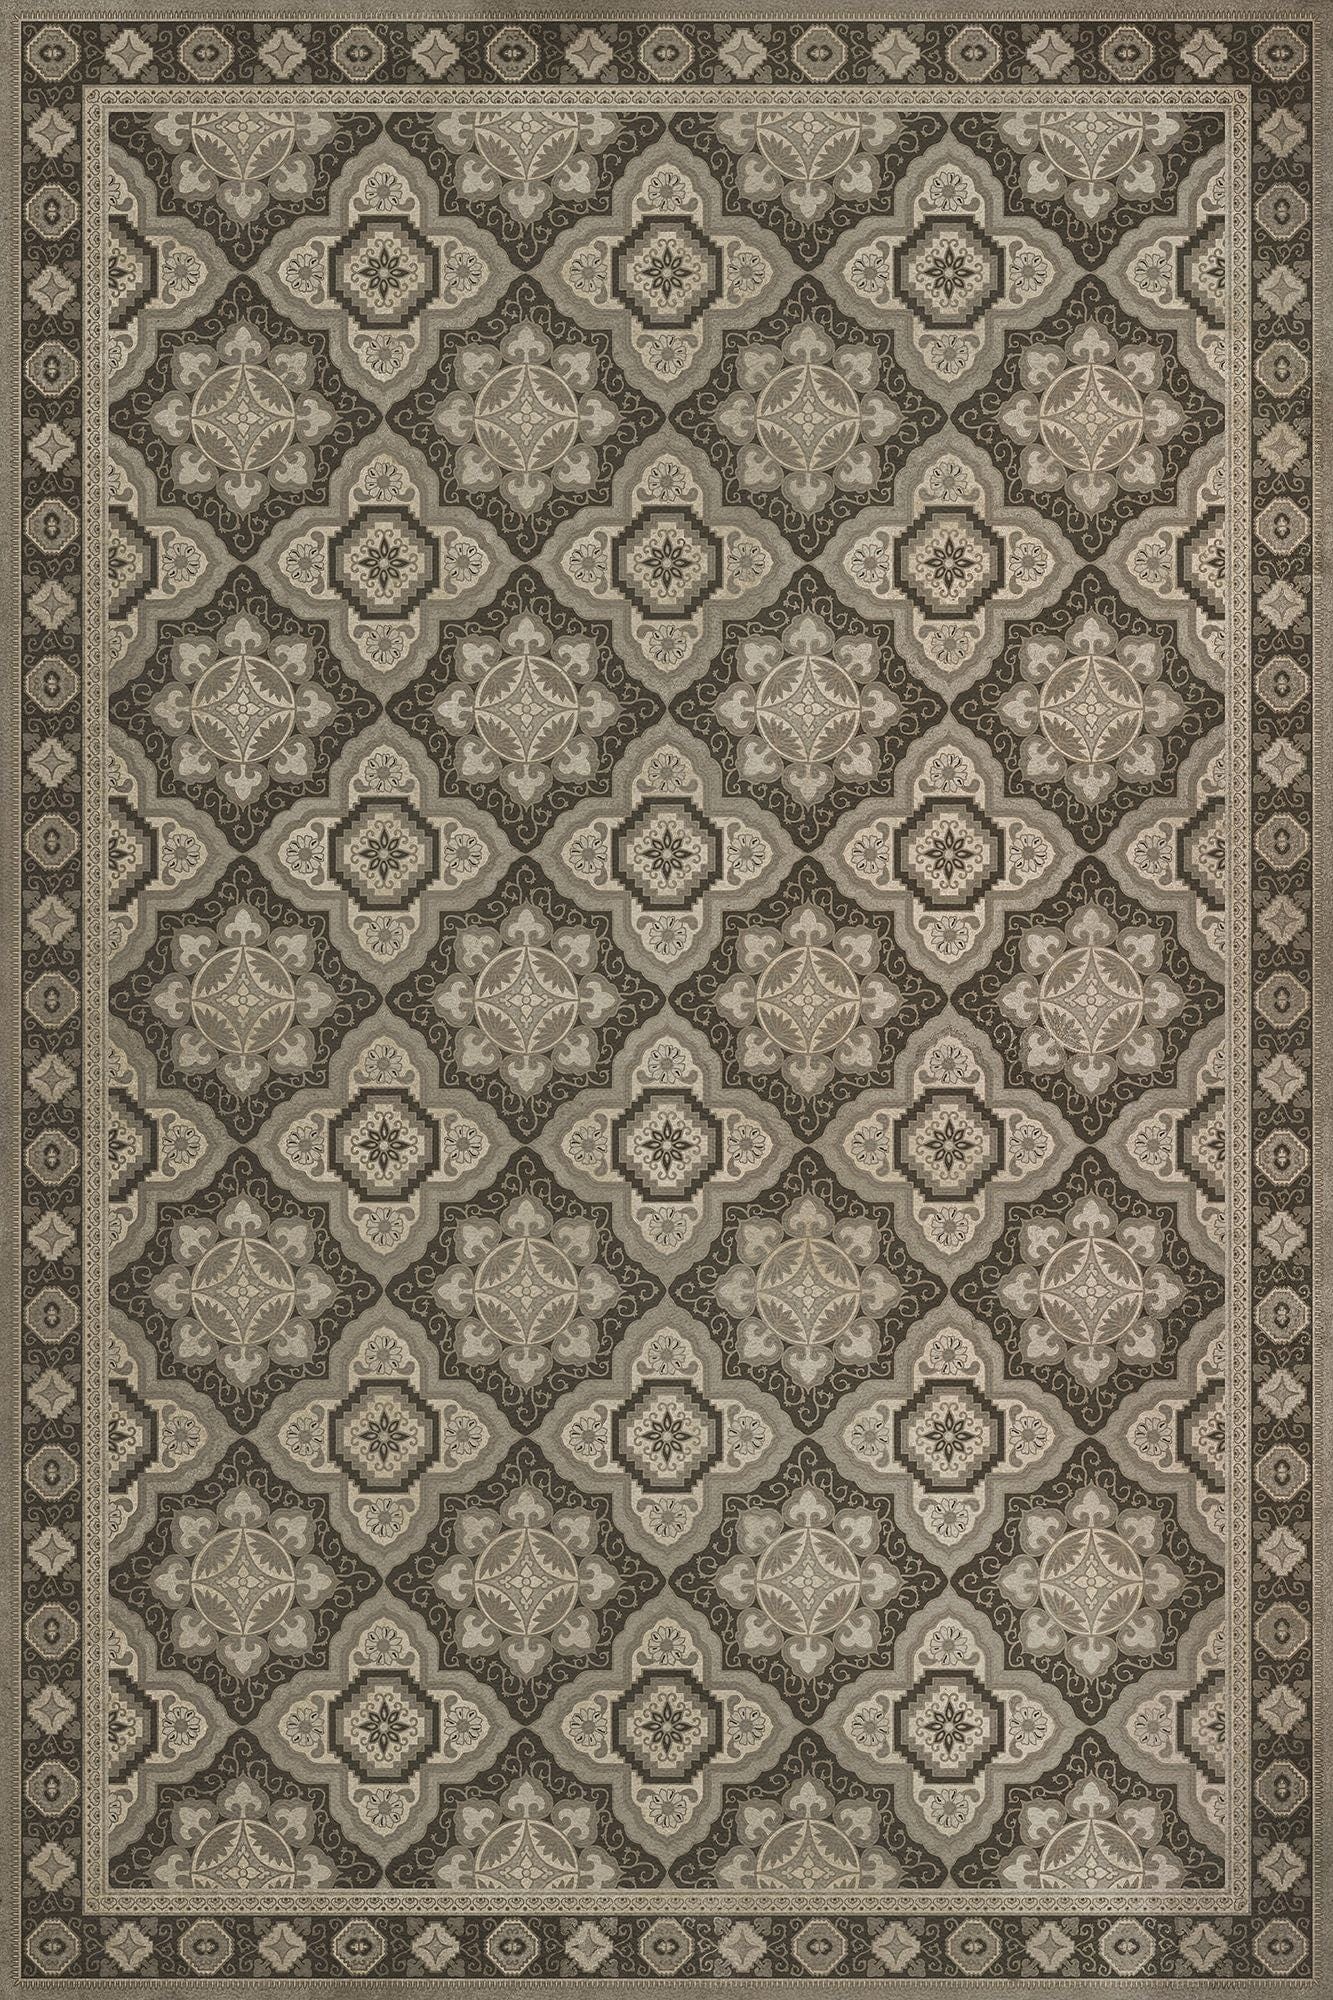 brown and tan antique-style rug